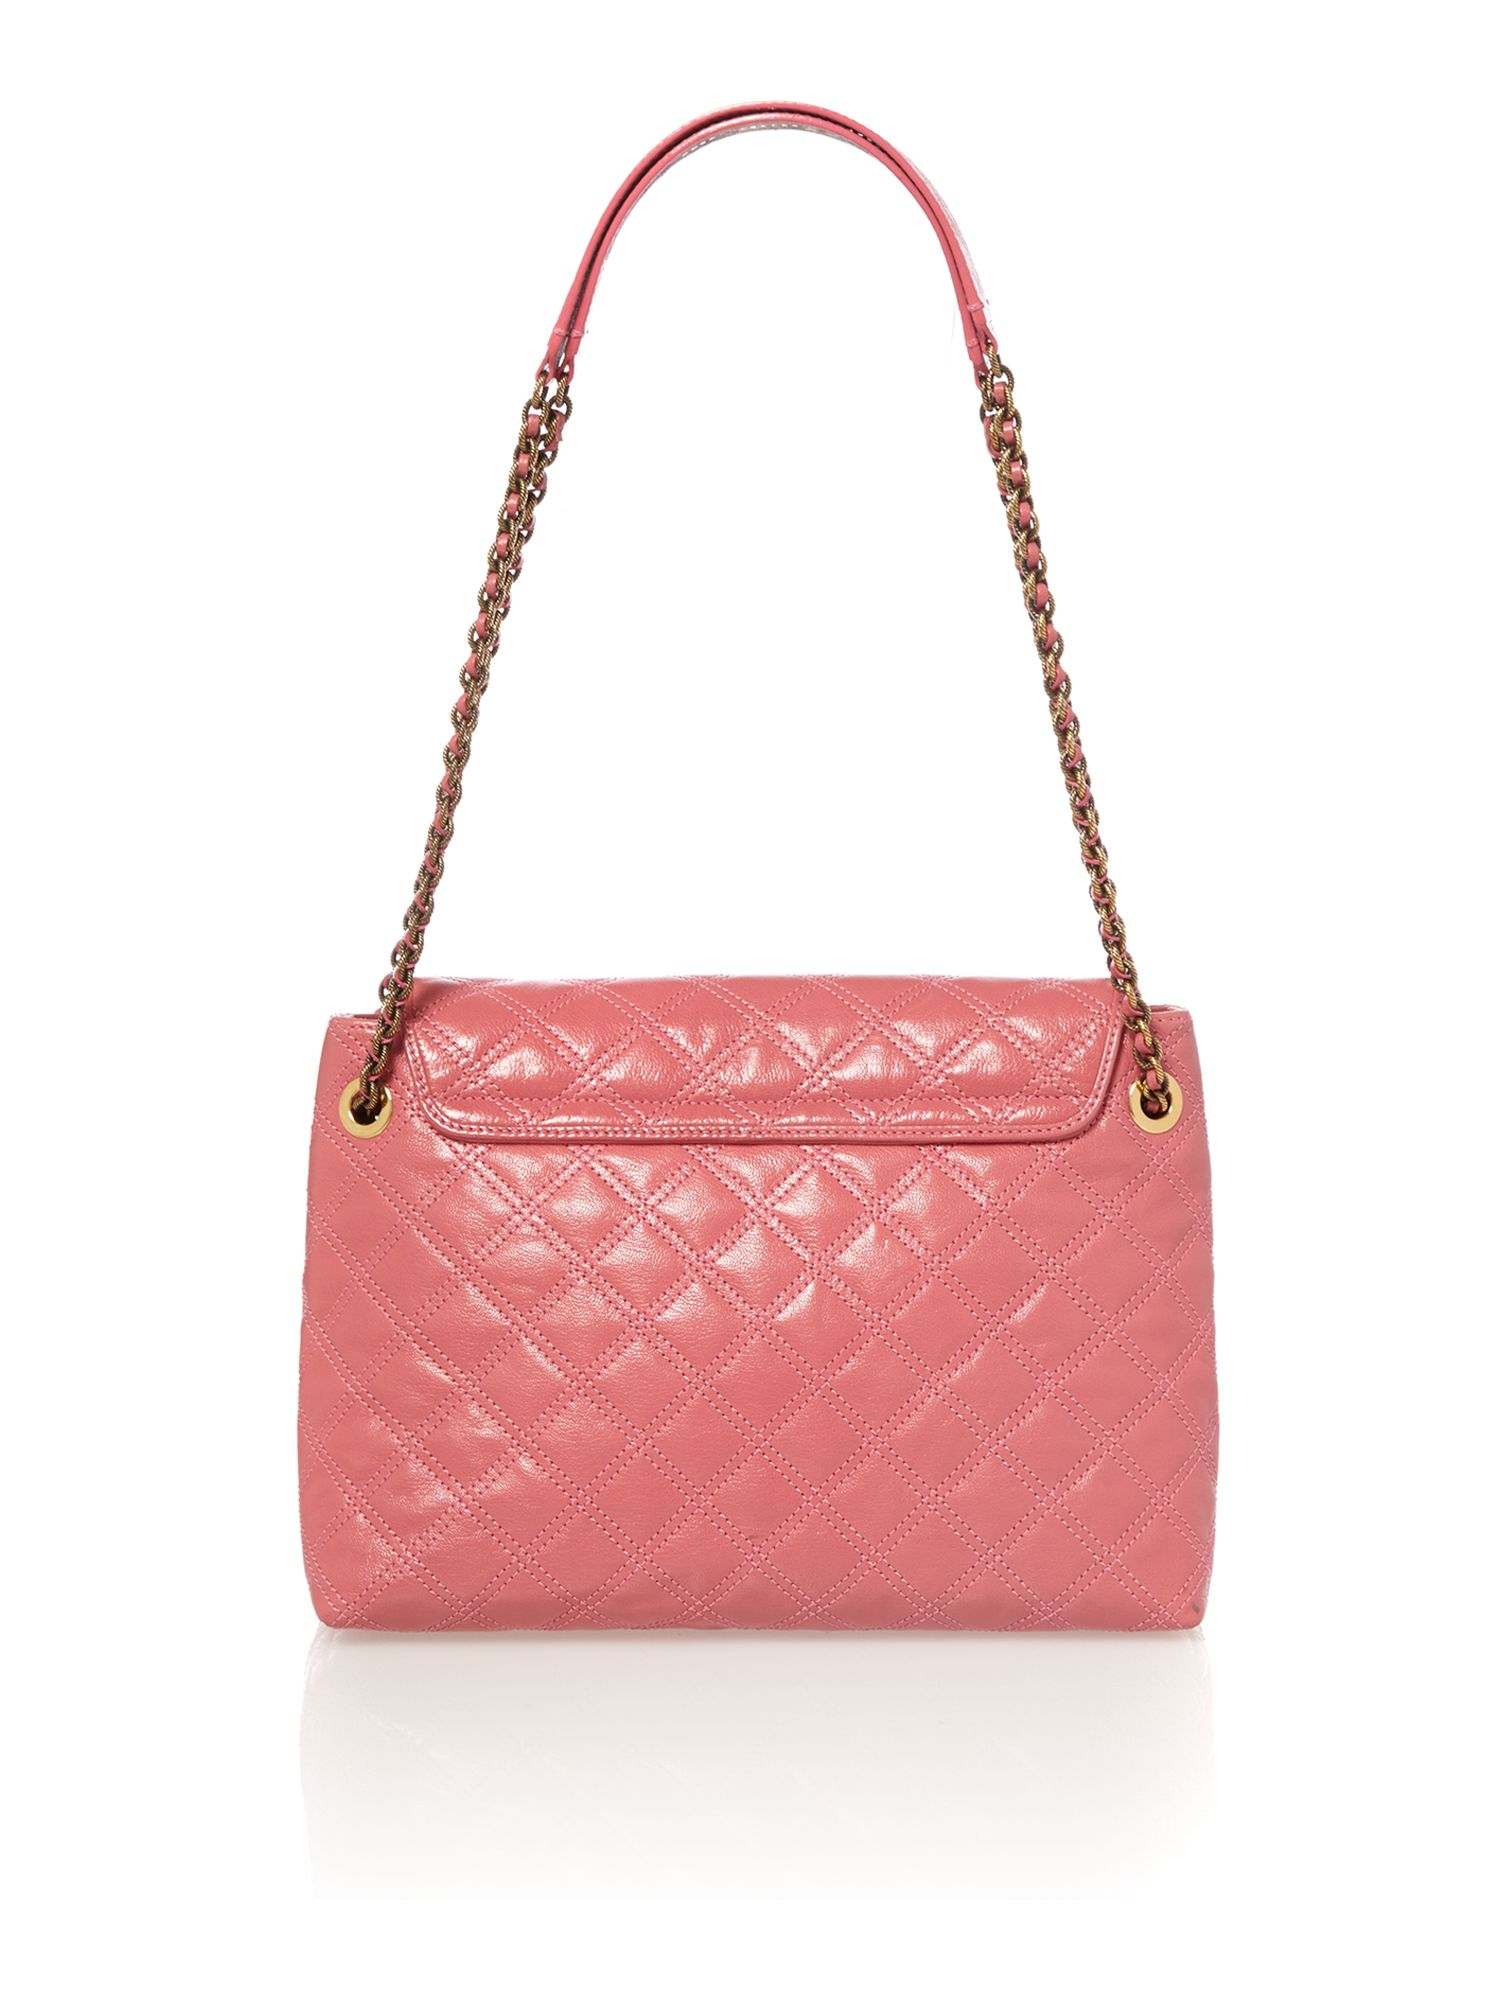 Marc jacobs Iconic Quilted Flapover Crossbody Bag in Pink | Lyst